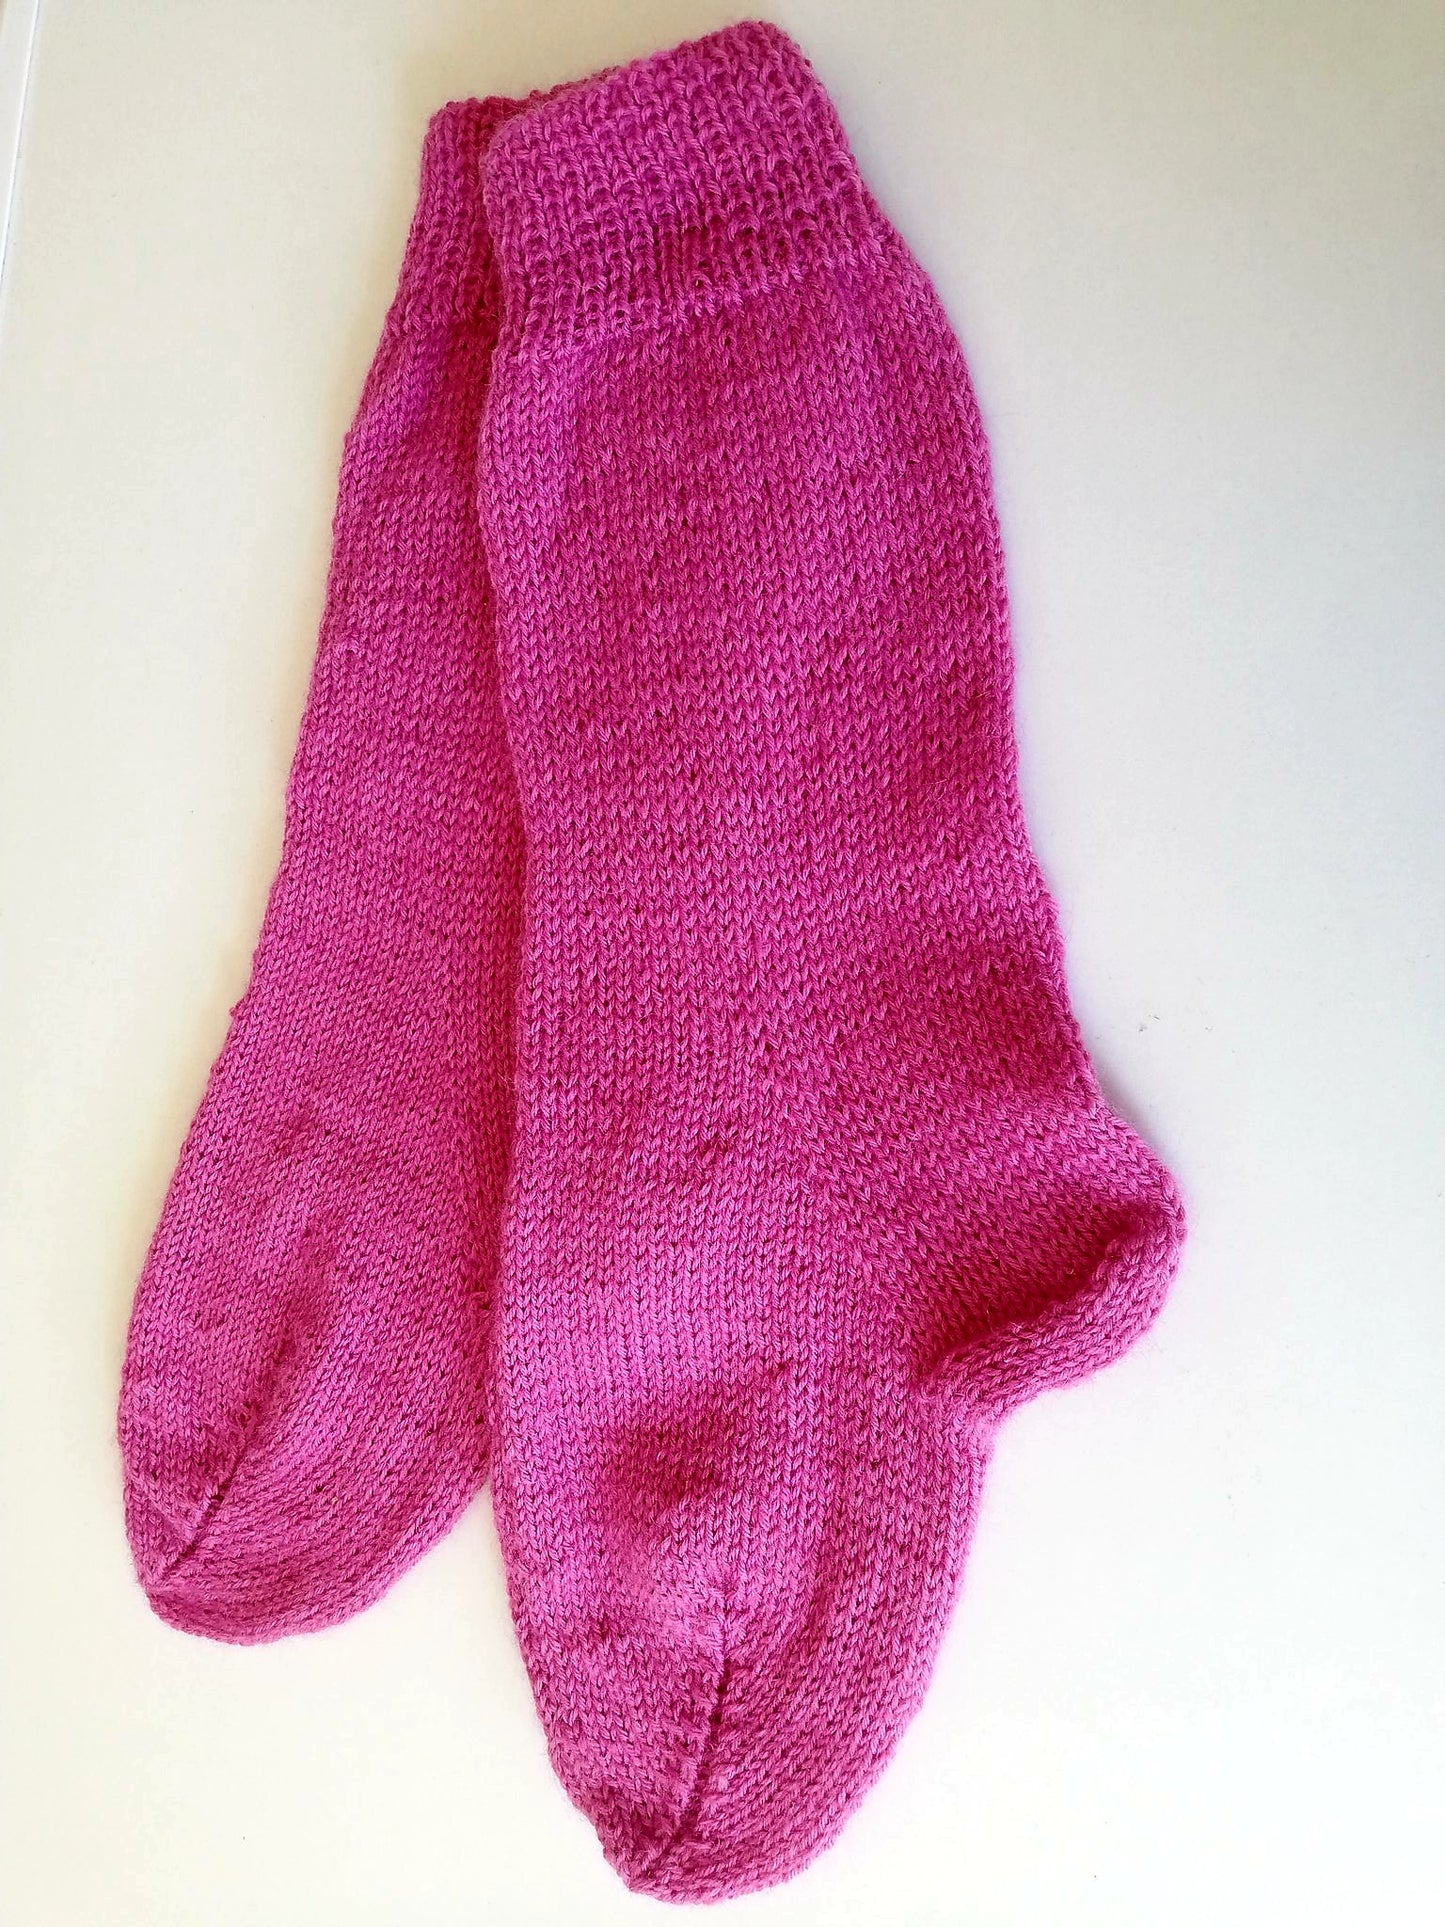 Imahe shows a paid of pink knitted socks laid on a white surface, 